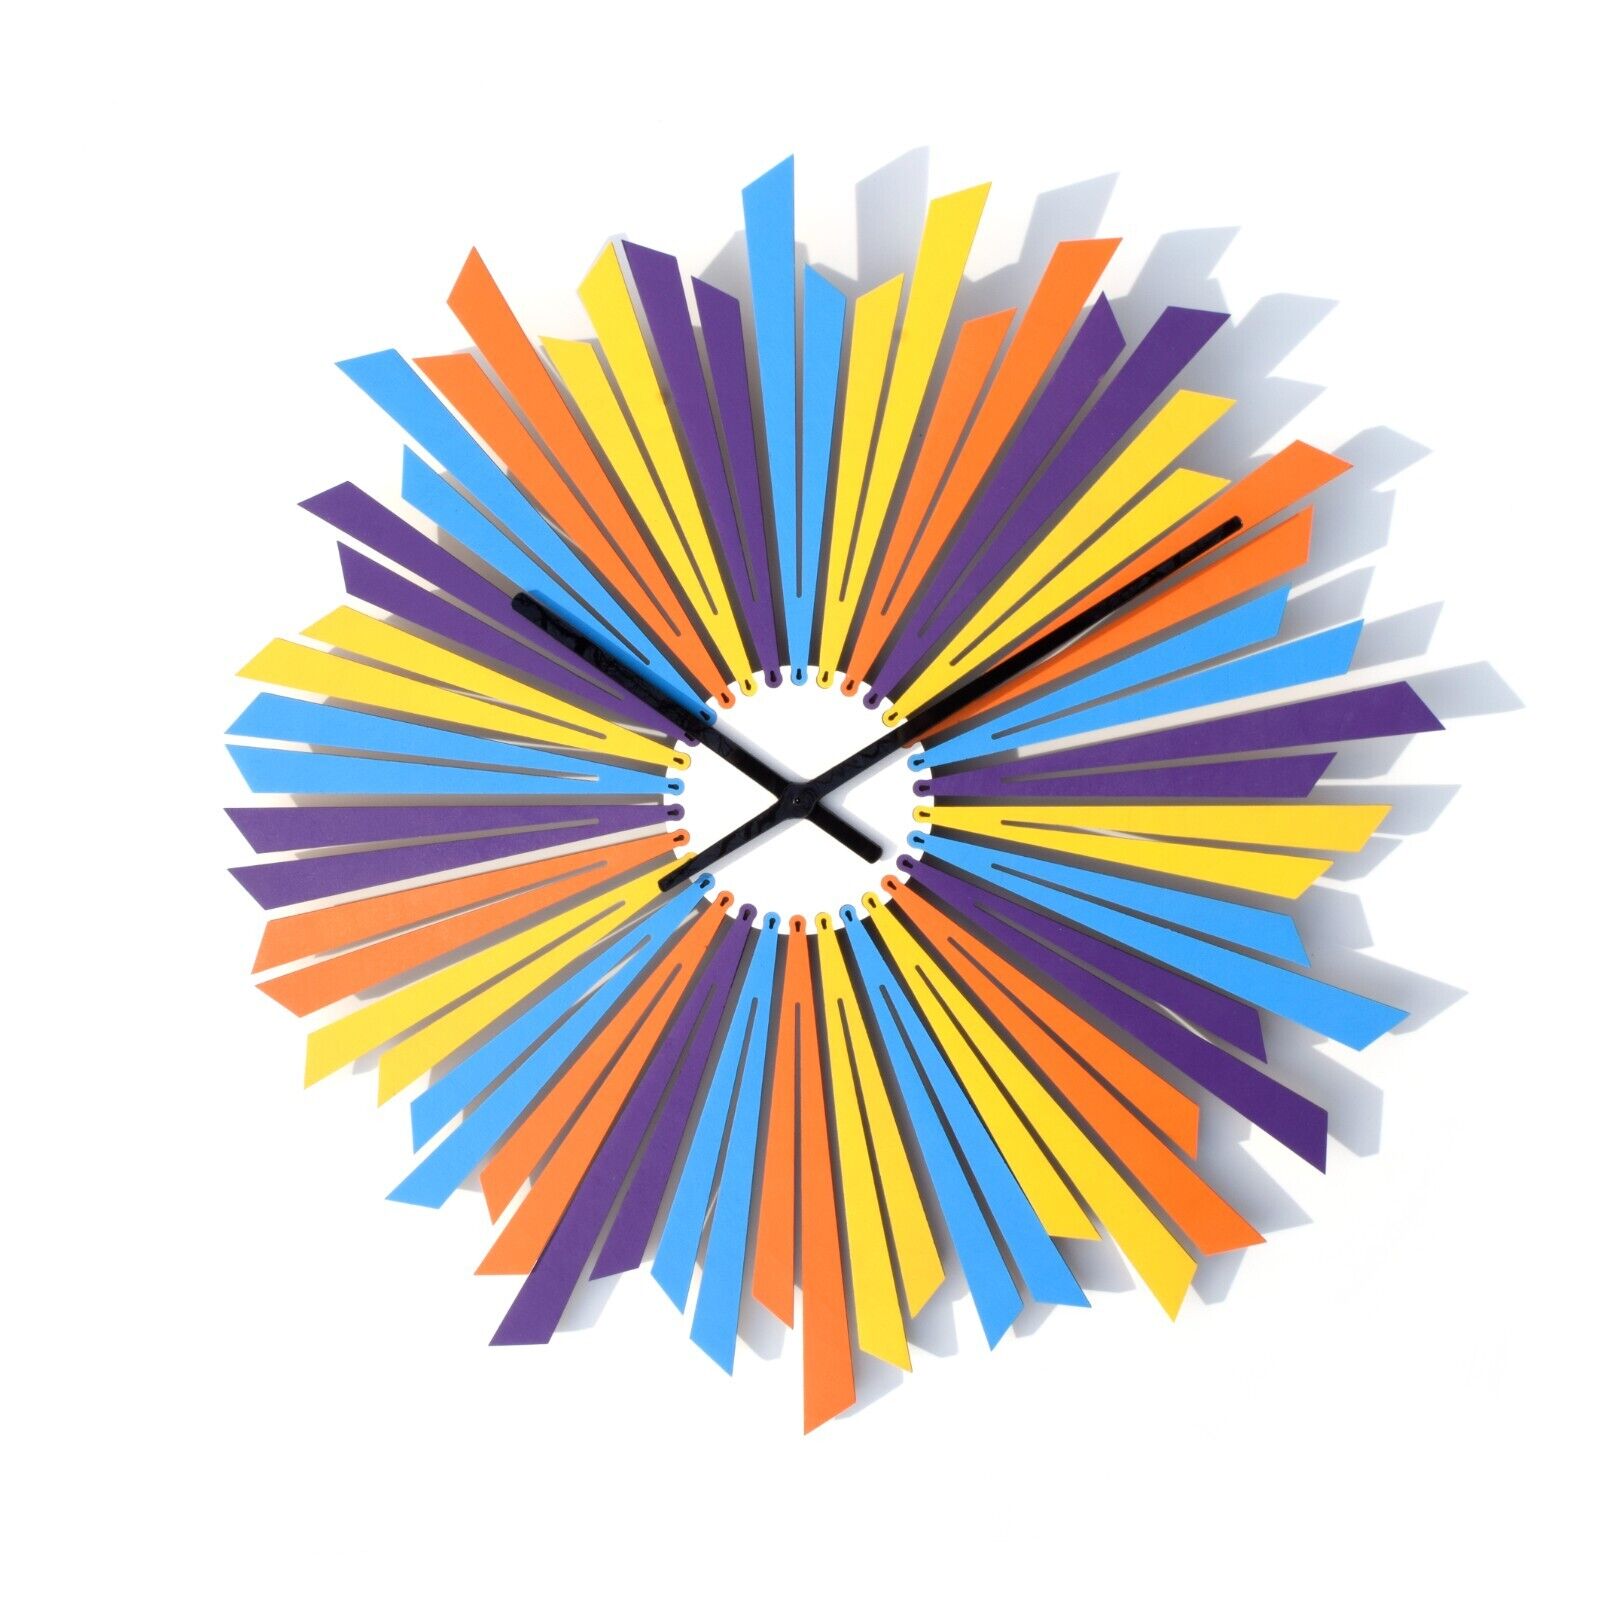 Organic handmade wooden wall clock with multicolor dial - The Comet